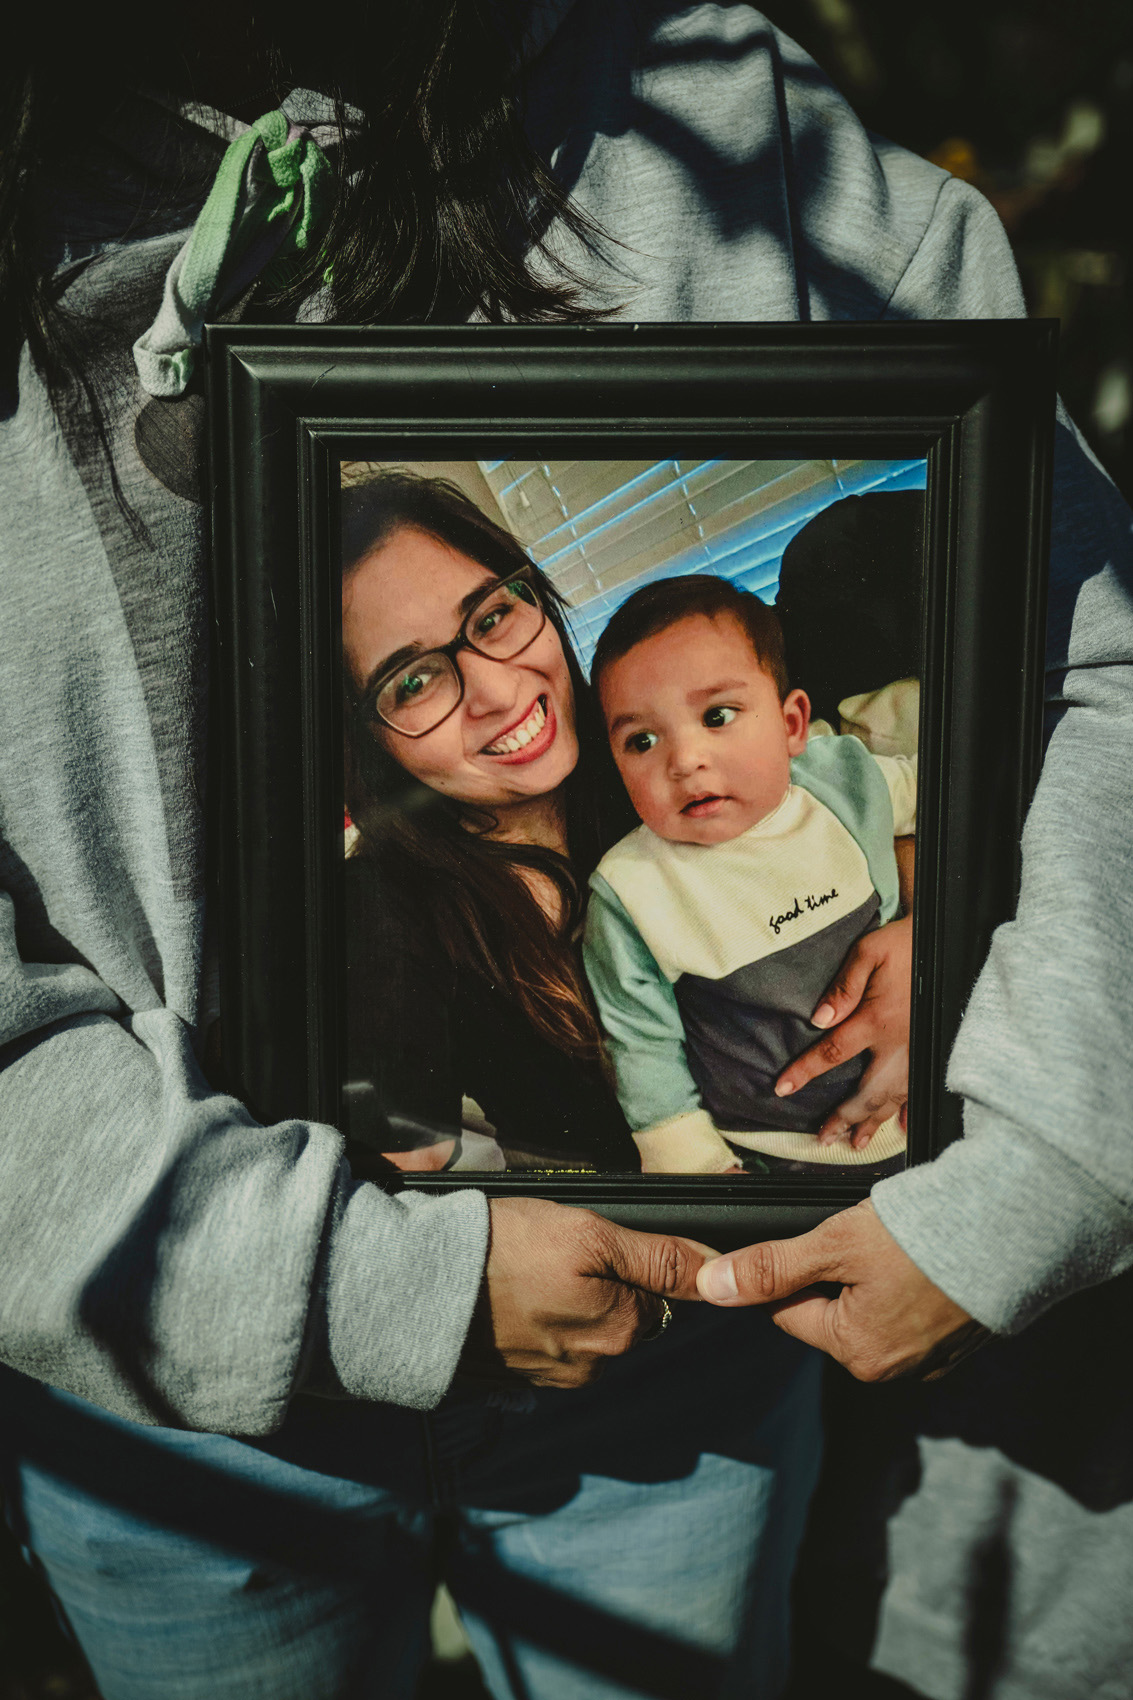 Giselle Bueno holds a photograph of her sister, Giovanna Cabrera Lopez, 31, and her 1-year-old son, Gabriel Peña, who both died in a house fire Saturday